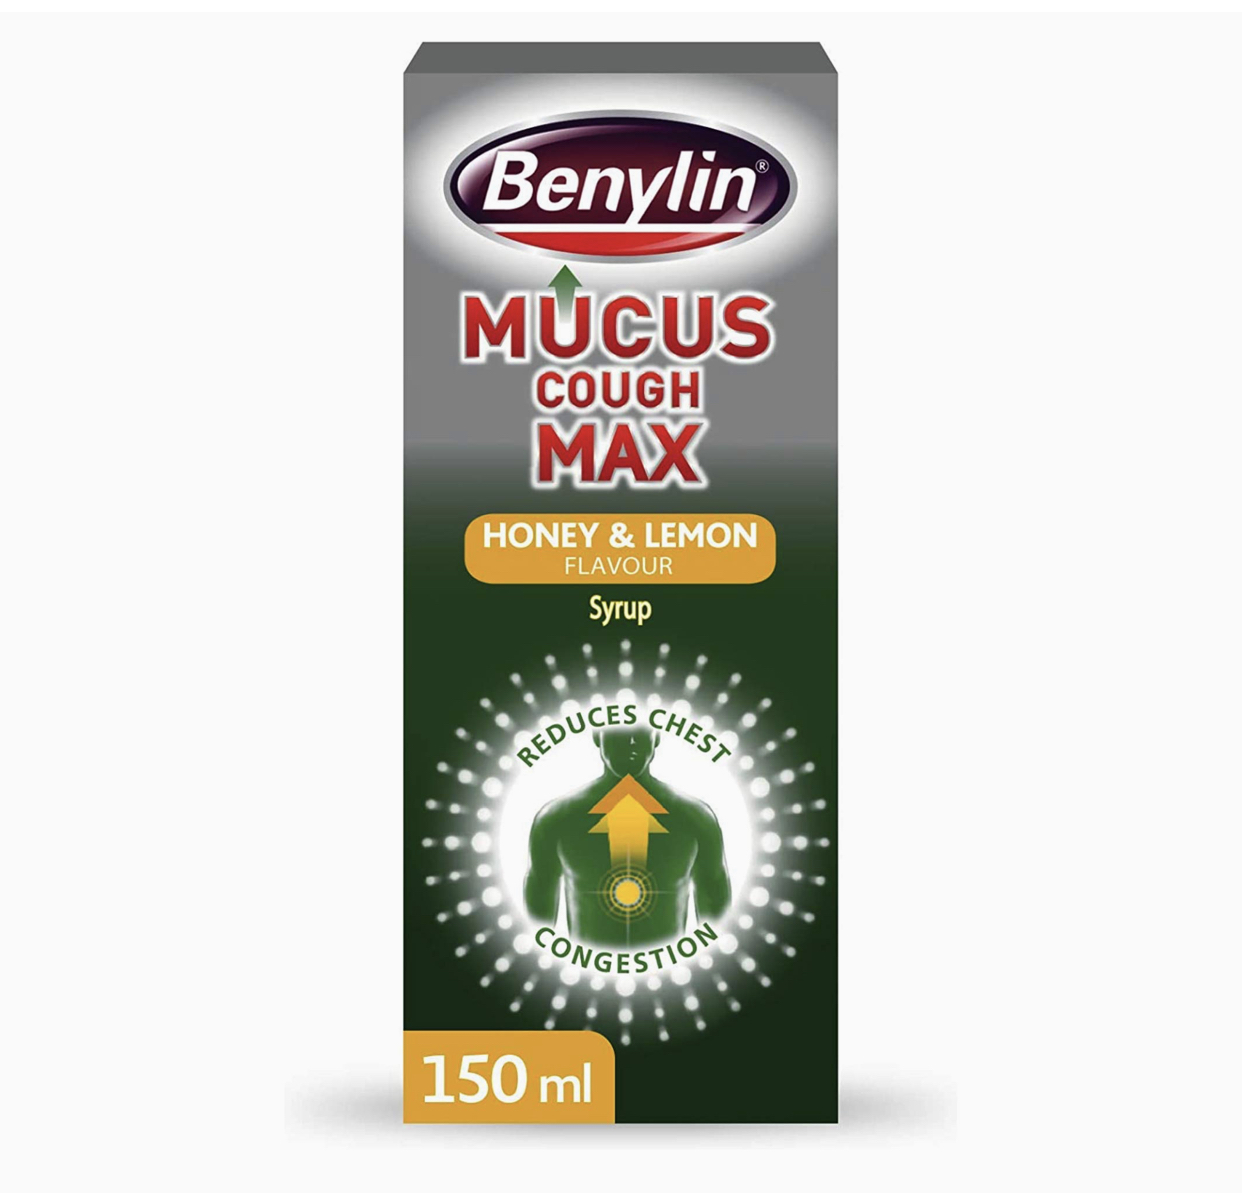 1681146438_Benylin20Mucus20Cough20Max2C20Honey20and20Lemon20Flavour2CE280A6.png